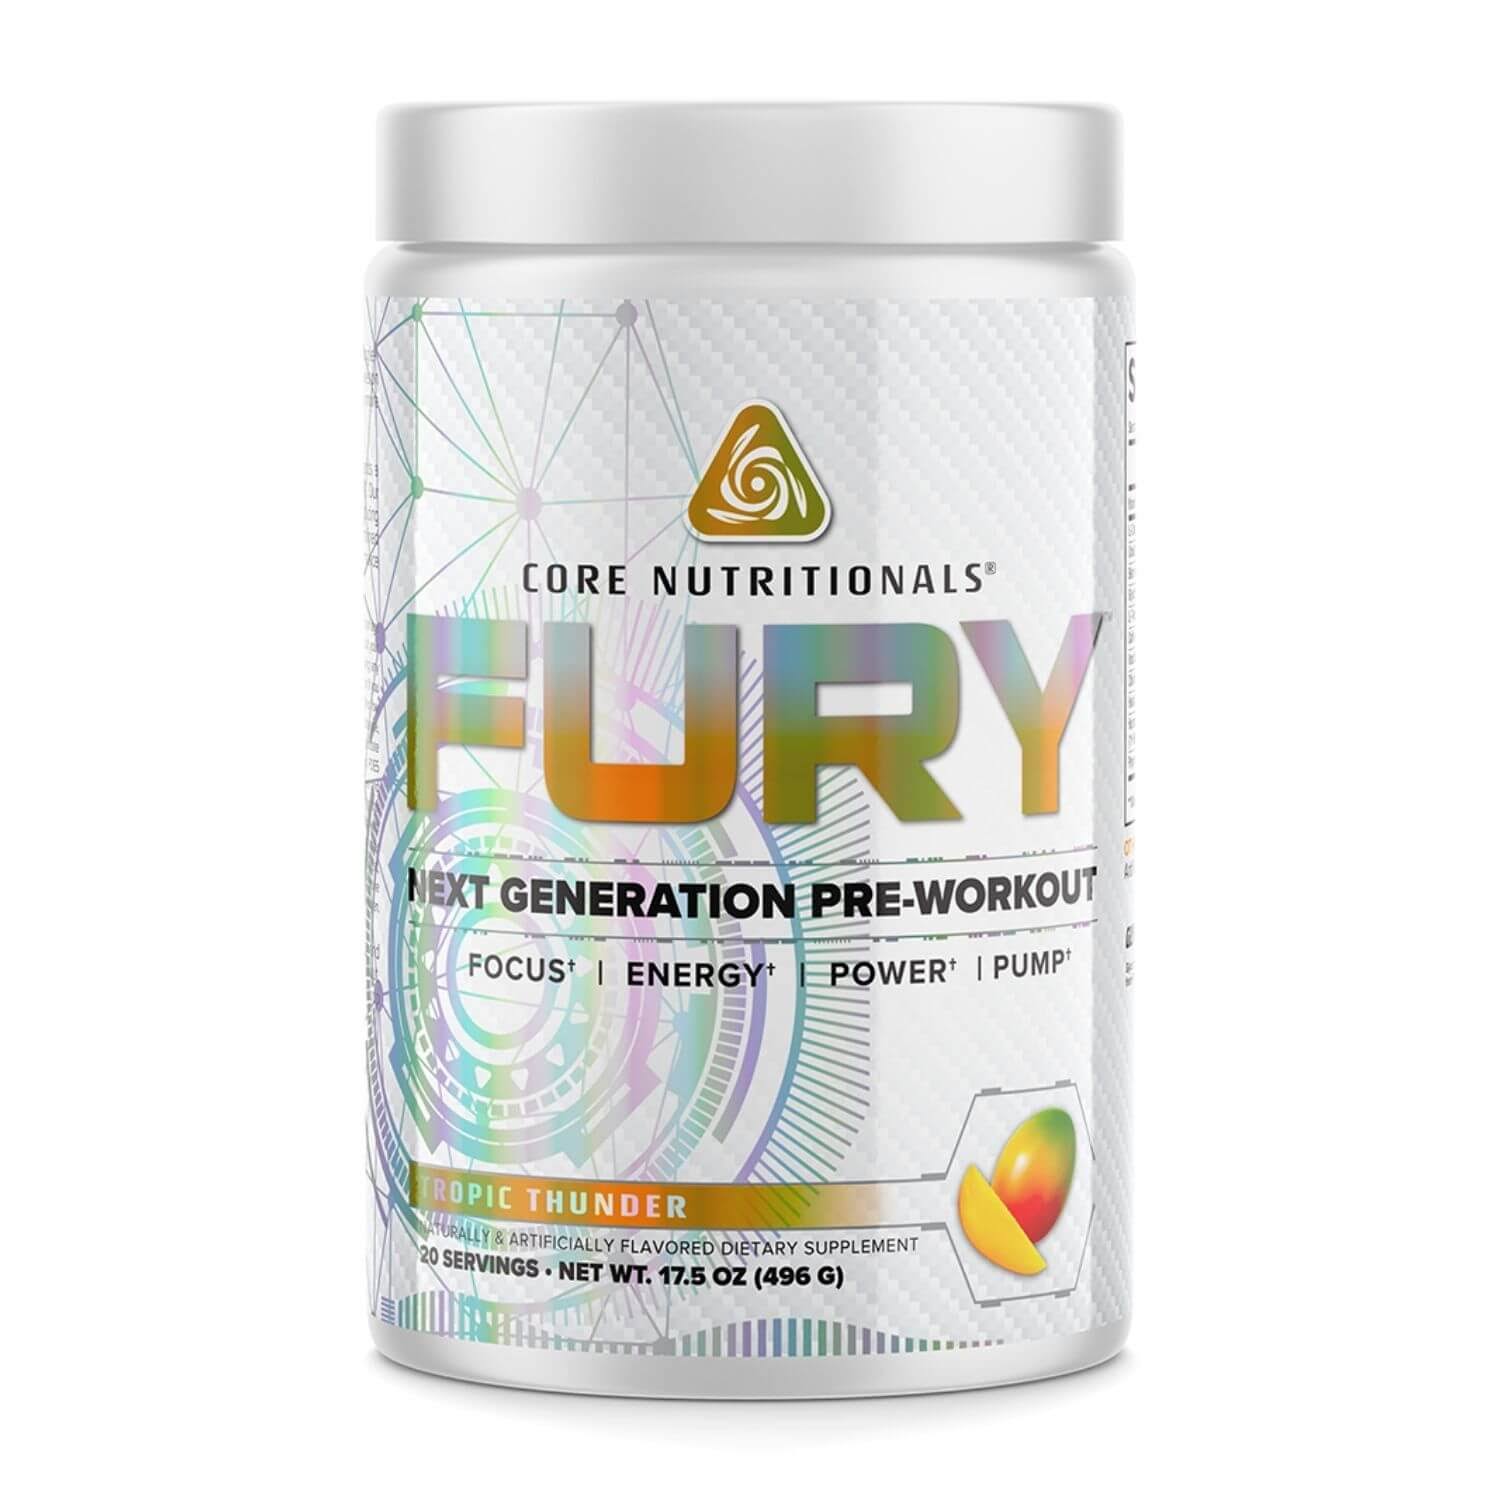 Core Nutritionals Fury Platinum Next Gen Pre Workout 20 Fully Dosed